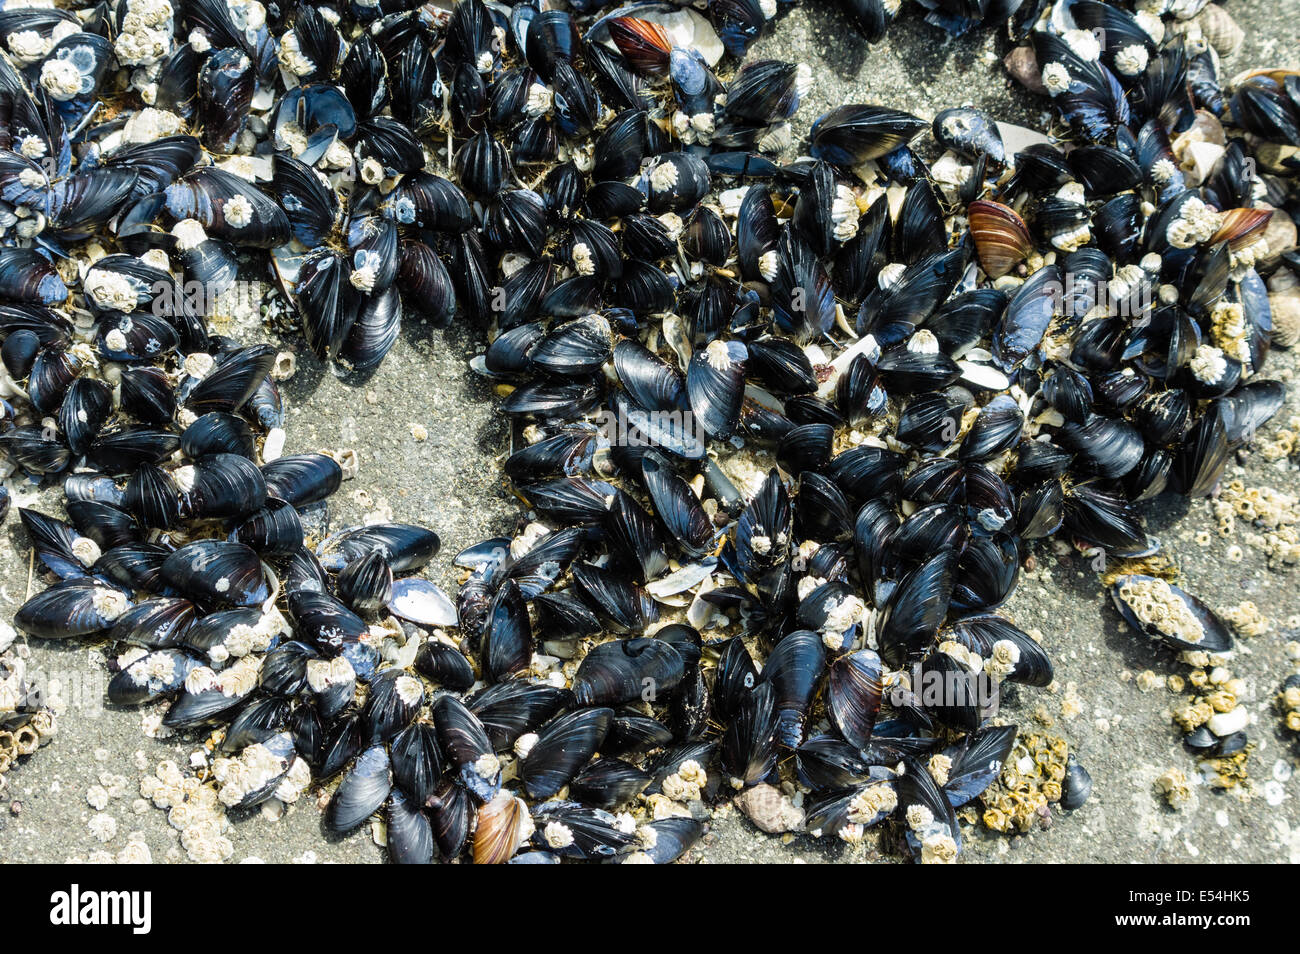 A group of mussels clinging to rocks in an intertidal zone Stock Photo